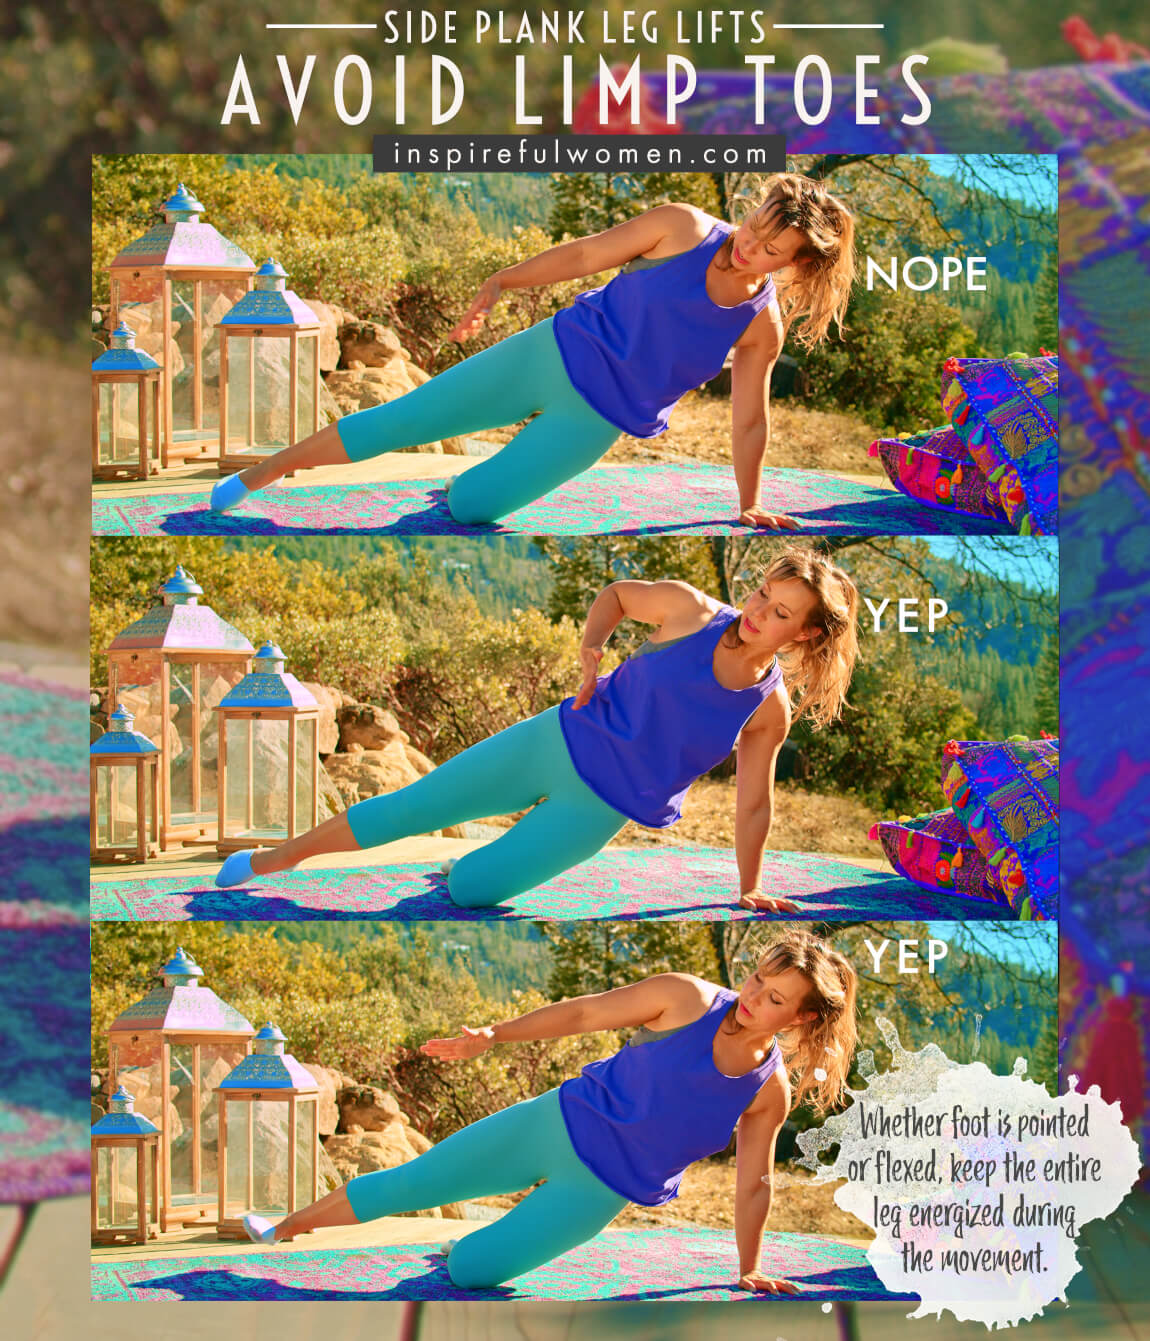 avoid-limp-toes-side-plank-hip-abduction-glute-exercise-common-mistakes